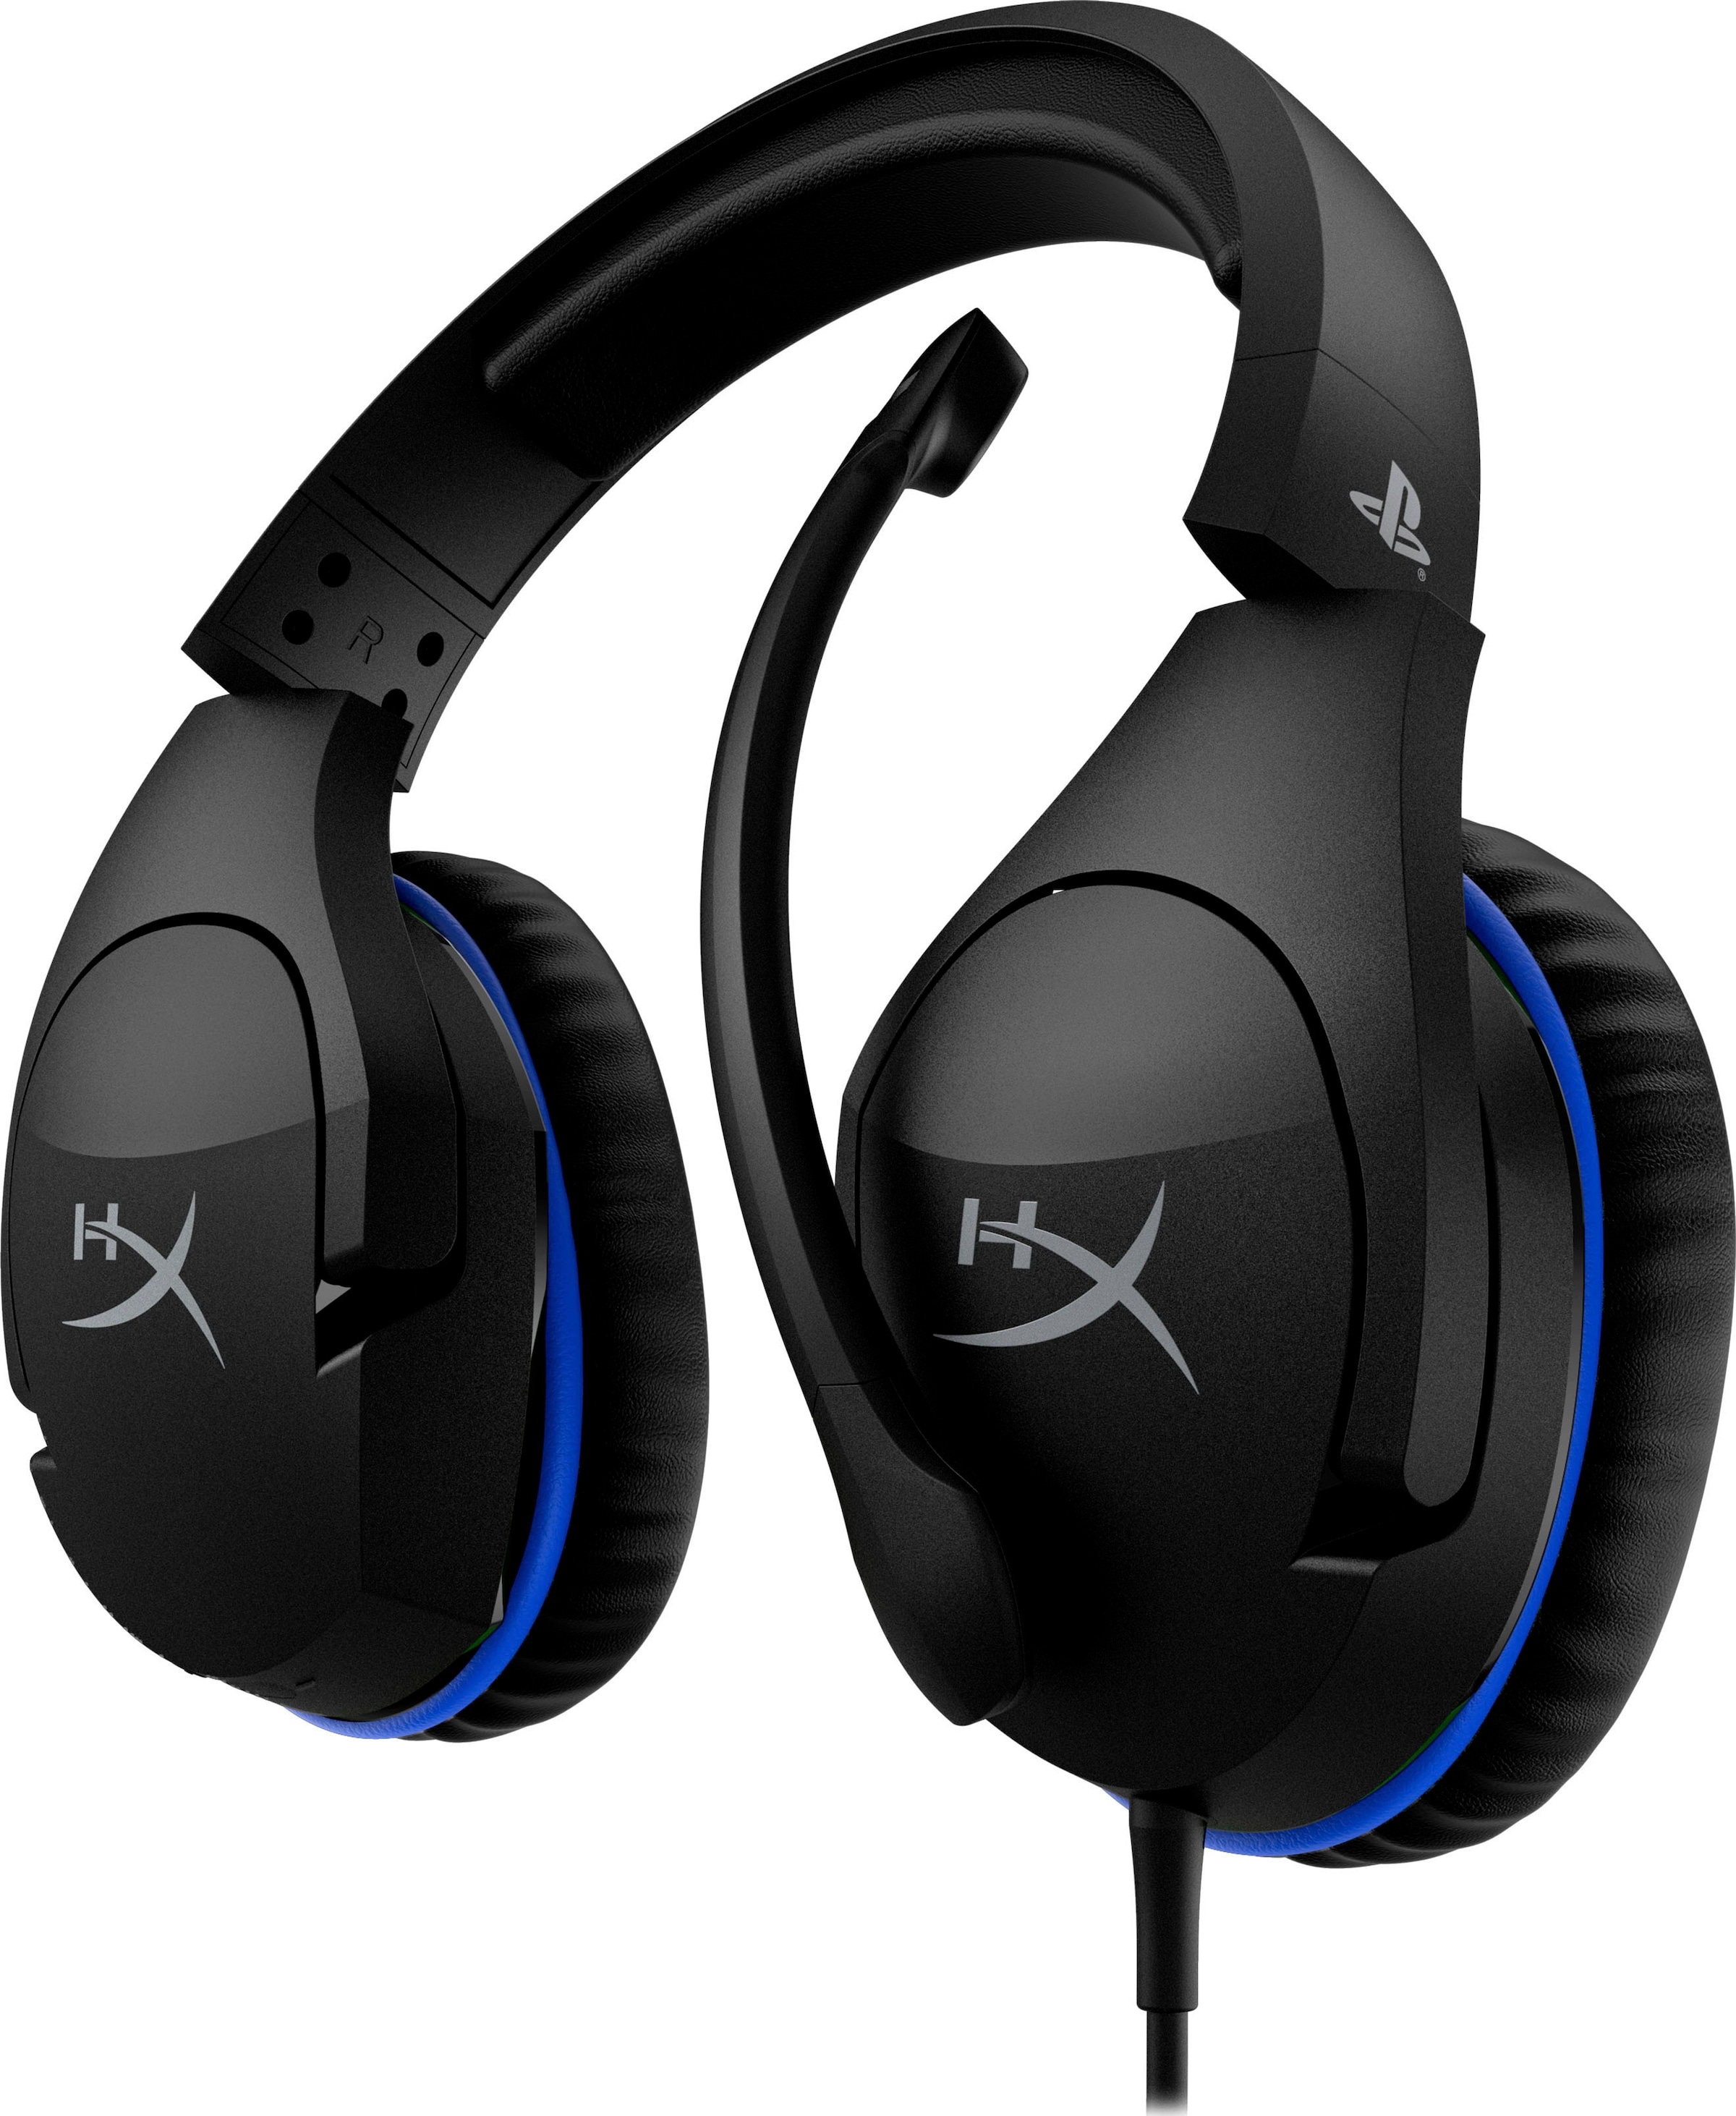 HyperX Gaming-Headset »Cloud Stinger Licensed)«, Mikrofon jetzt abnehmbar OTTO bei (PS4